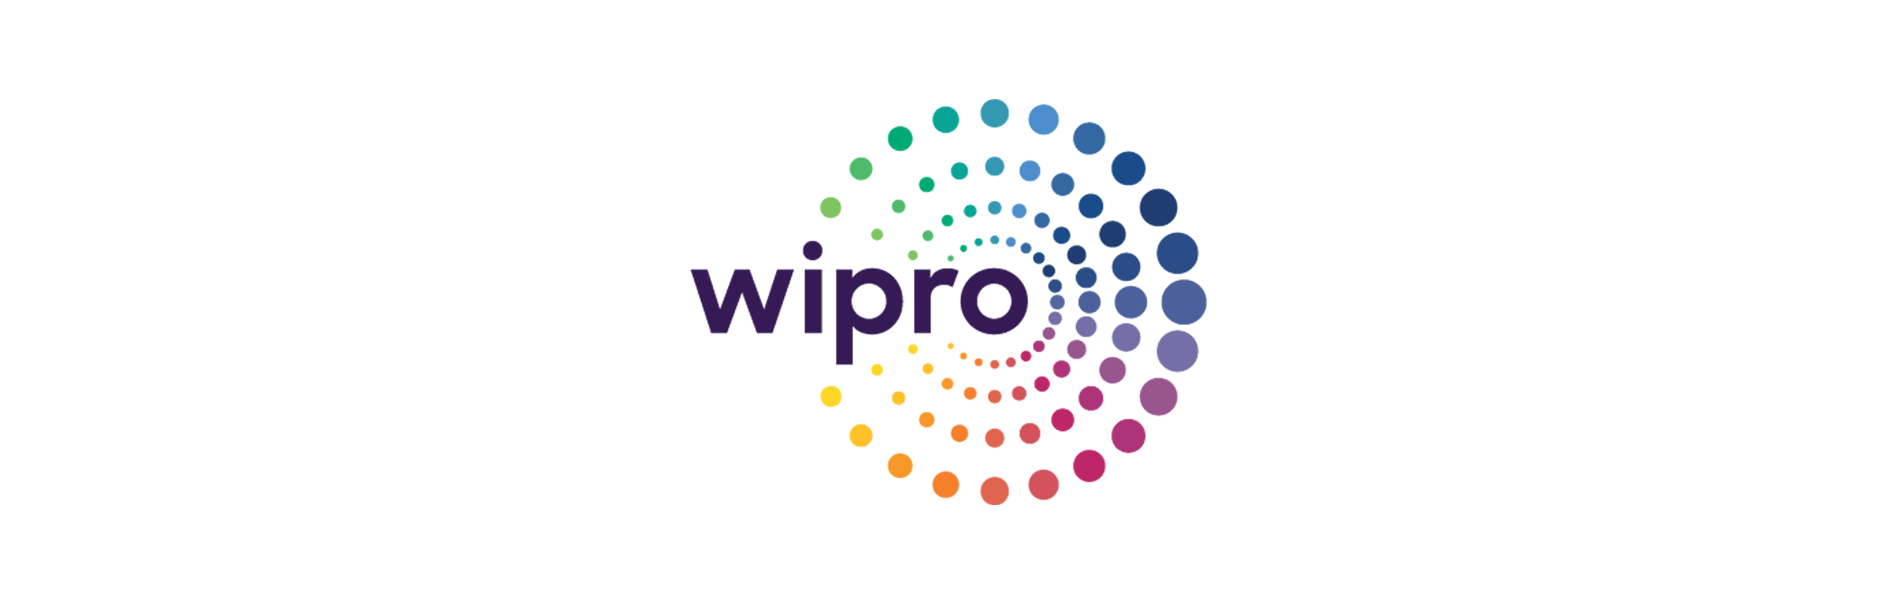 The Manufacturing Industry Is The Most Advanced In Cloud Adoption: Wipro Report